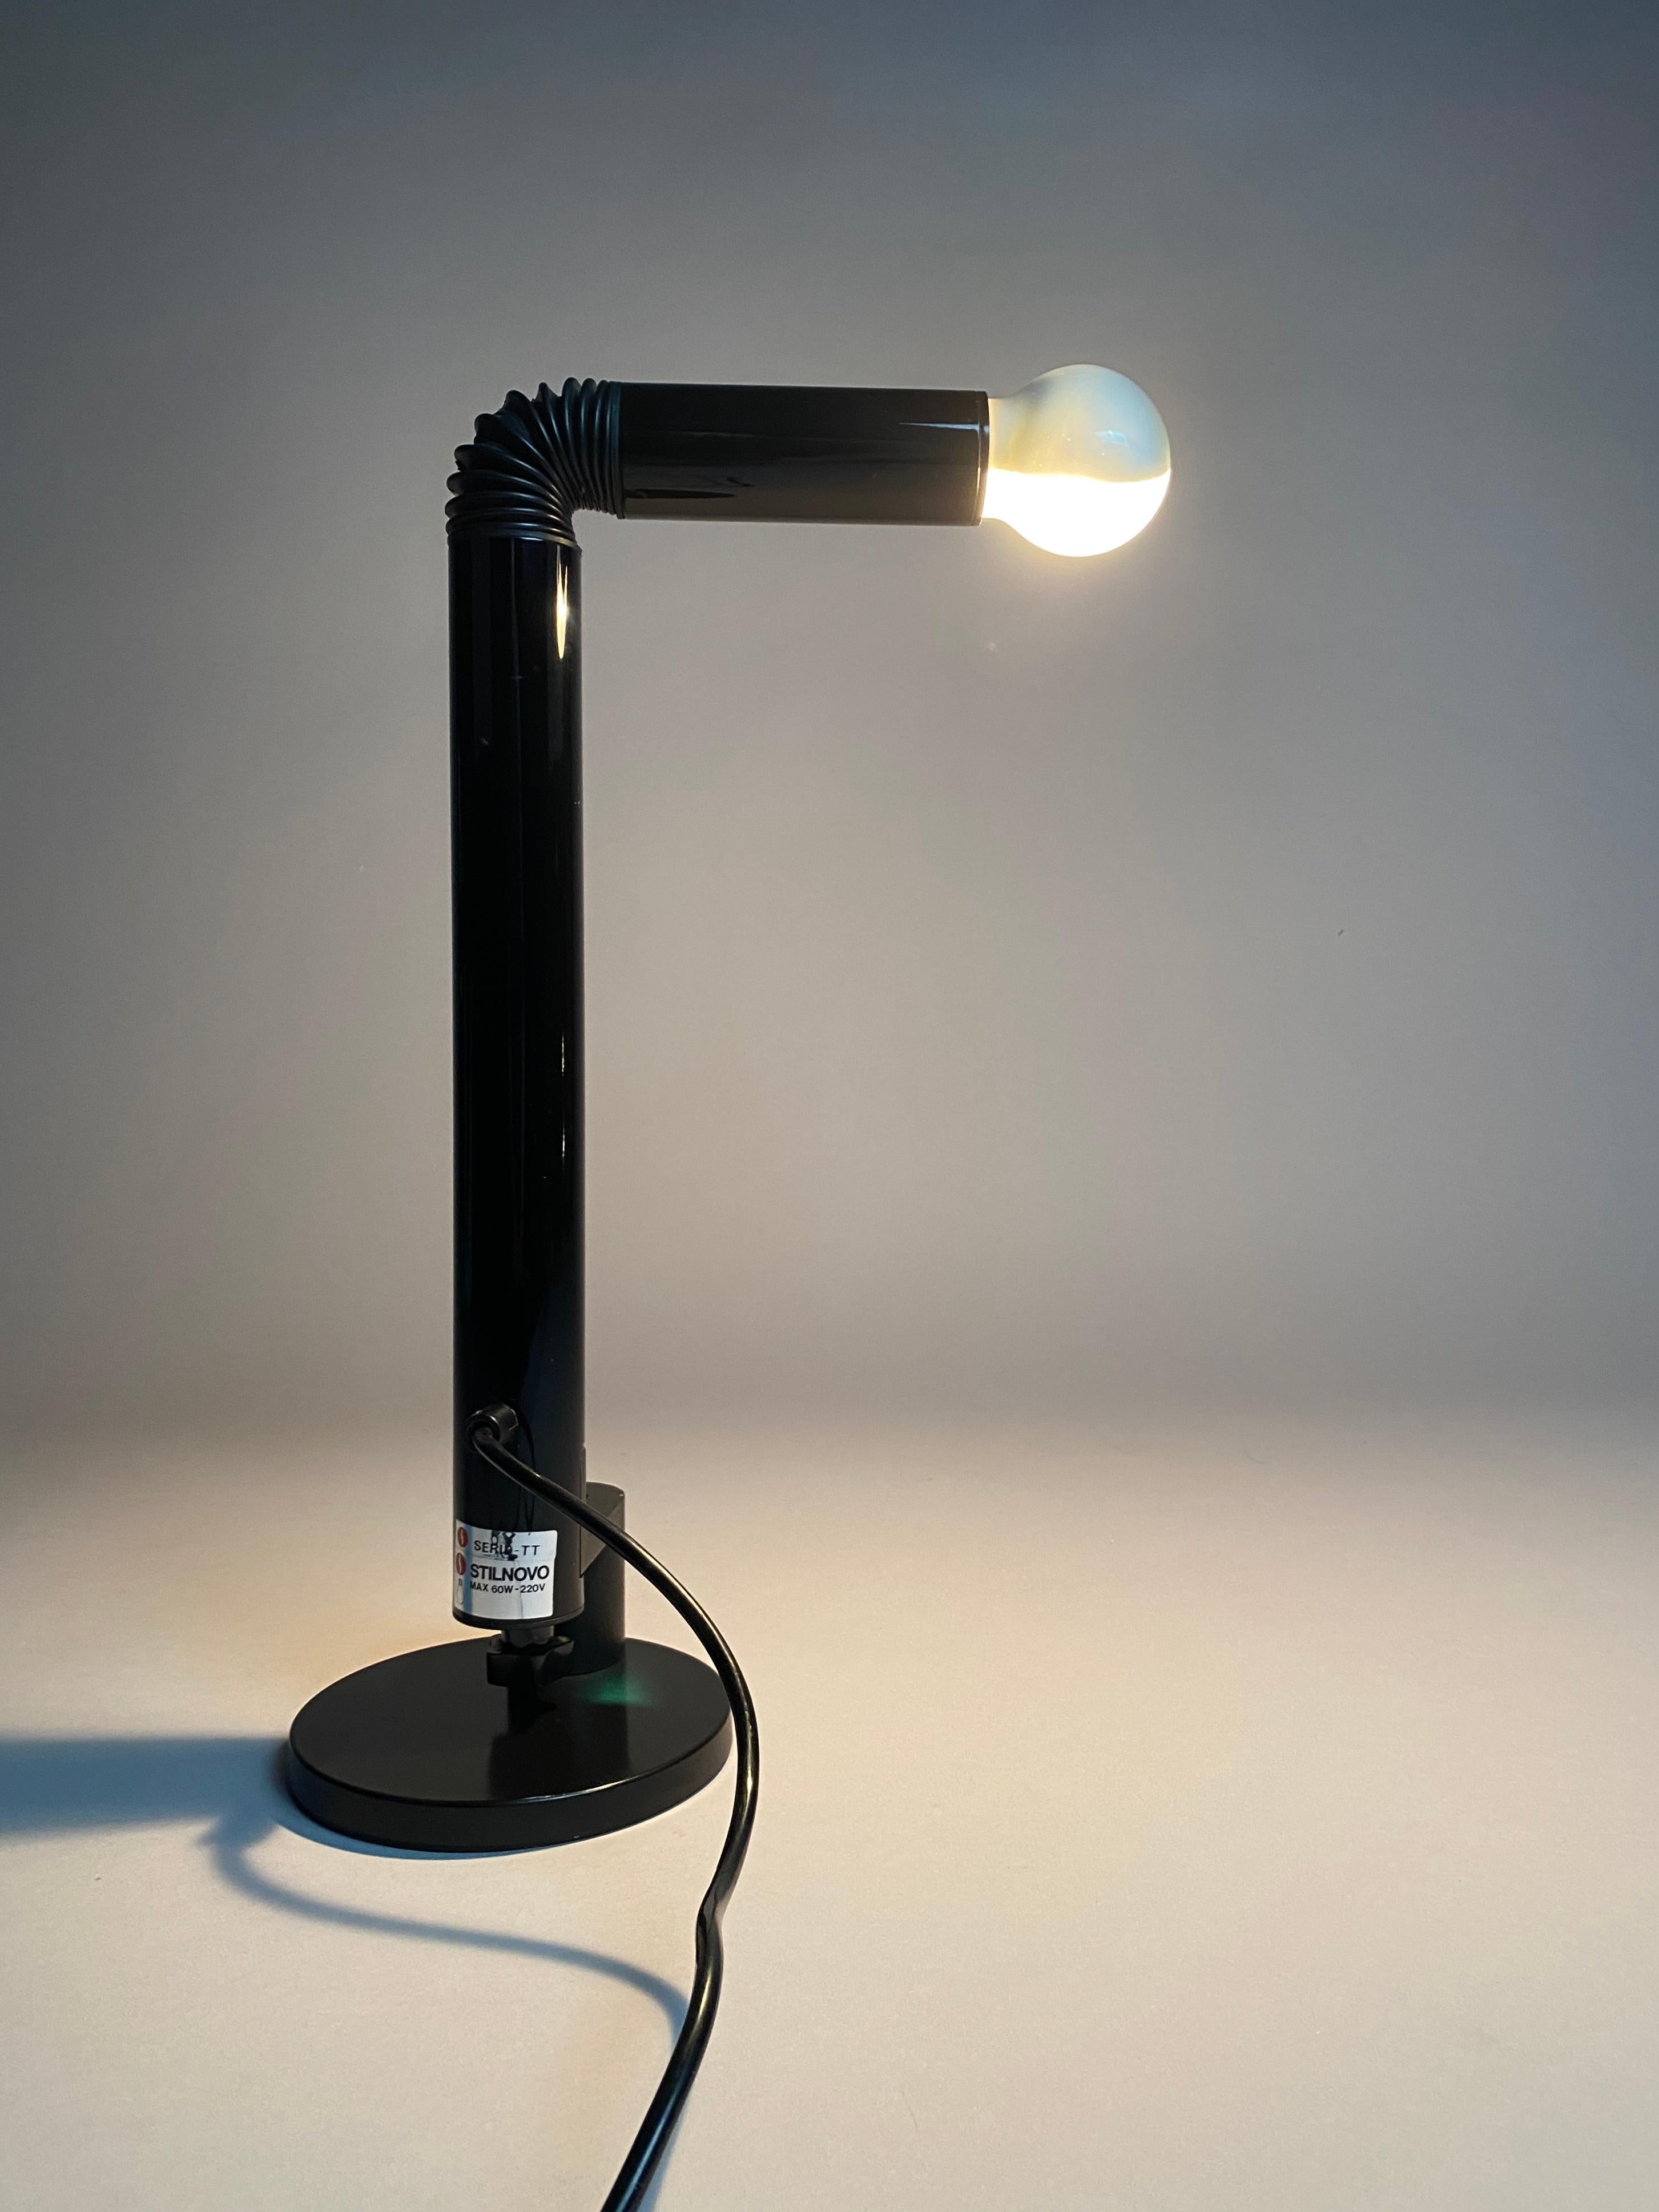 Illuminate your space with timeless elegance and unparalleled style with the iconic Black Vintage Periscopio Table Lamp, designed by the visionary duo Danilo and Corrado Aroldi for Stilnovo, Italy in 1967. A true embodiment of mid-century modern